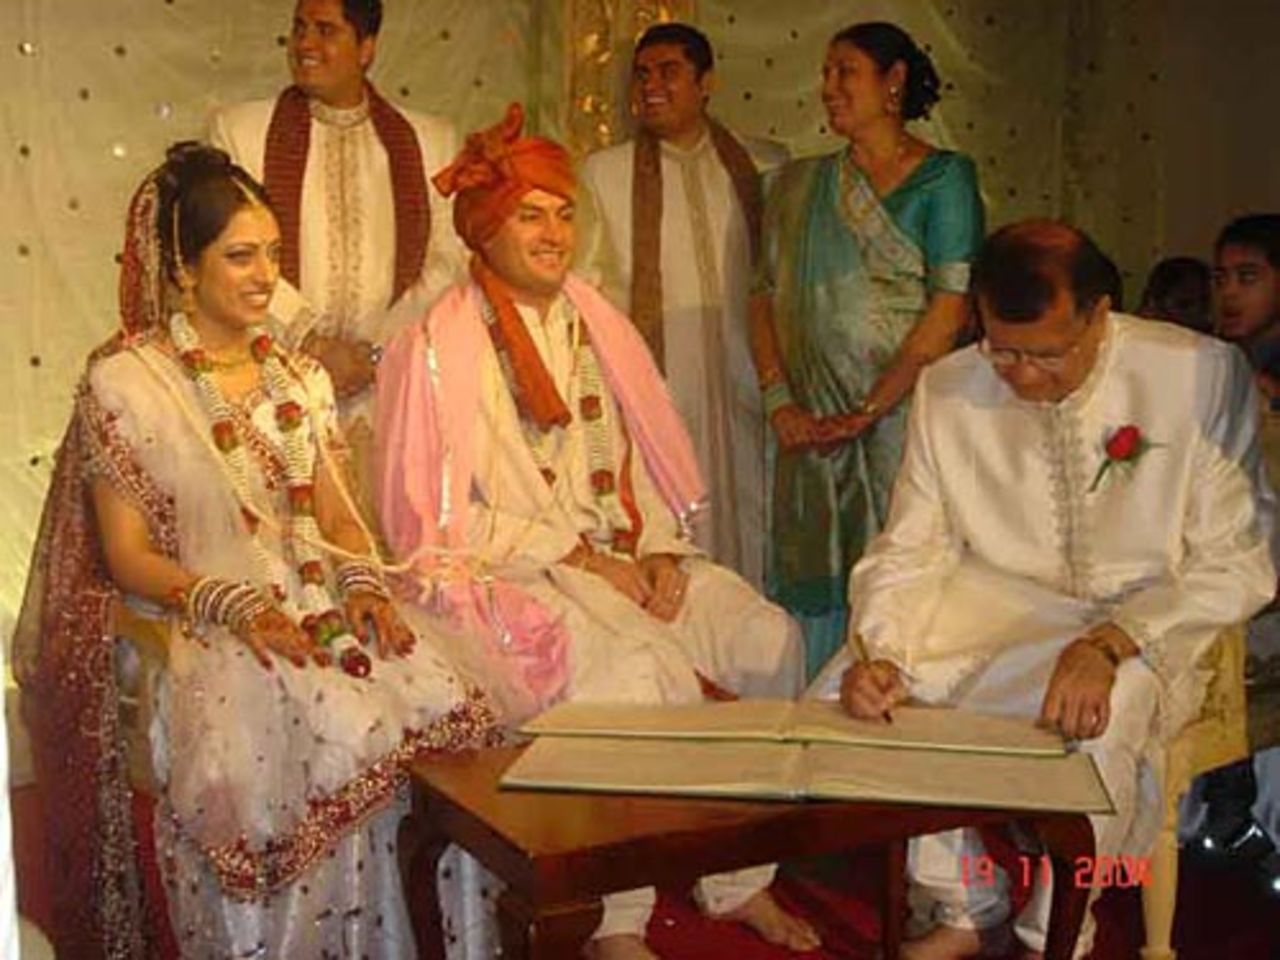 Hitesh Modi's wedding - Rear Left to right: Two brothers Nimesh and Dipesh, and mother Arunaben. Front left to right: Sharmilee, Hitesh and father Subhashbhai signing the marriage book.